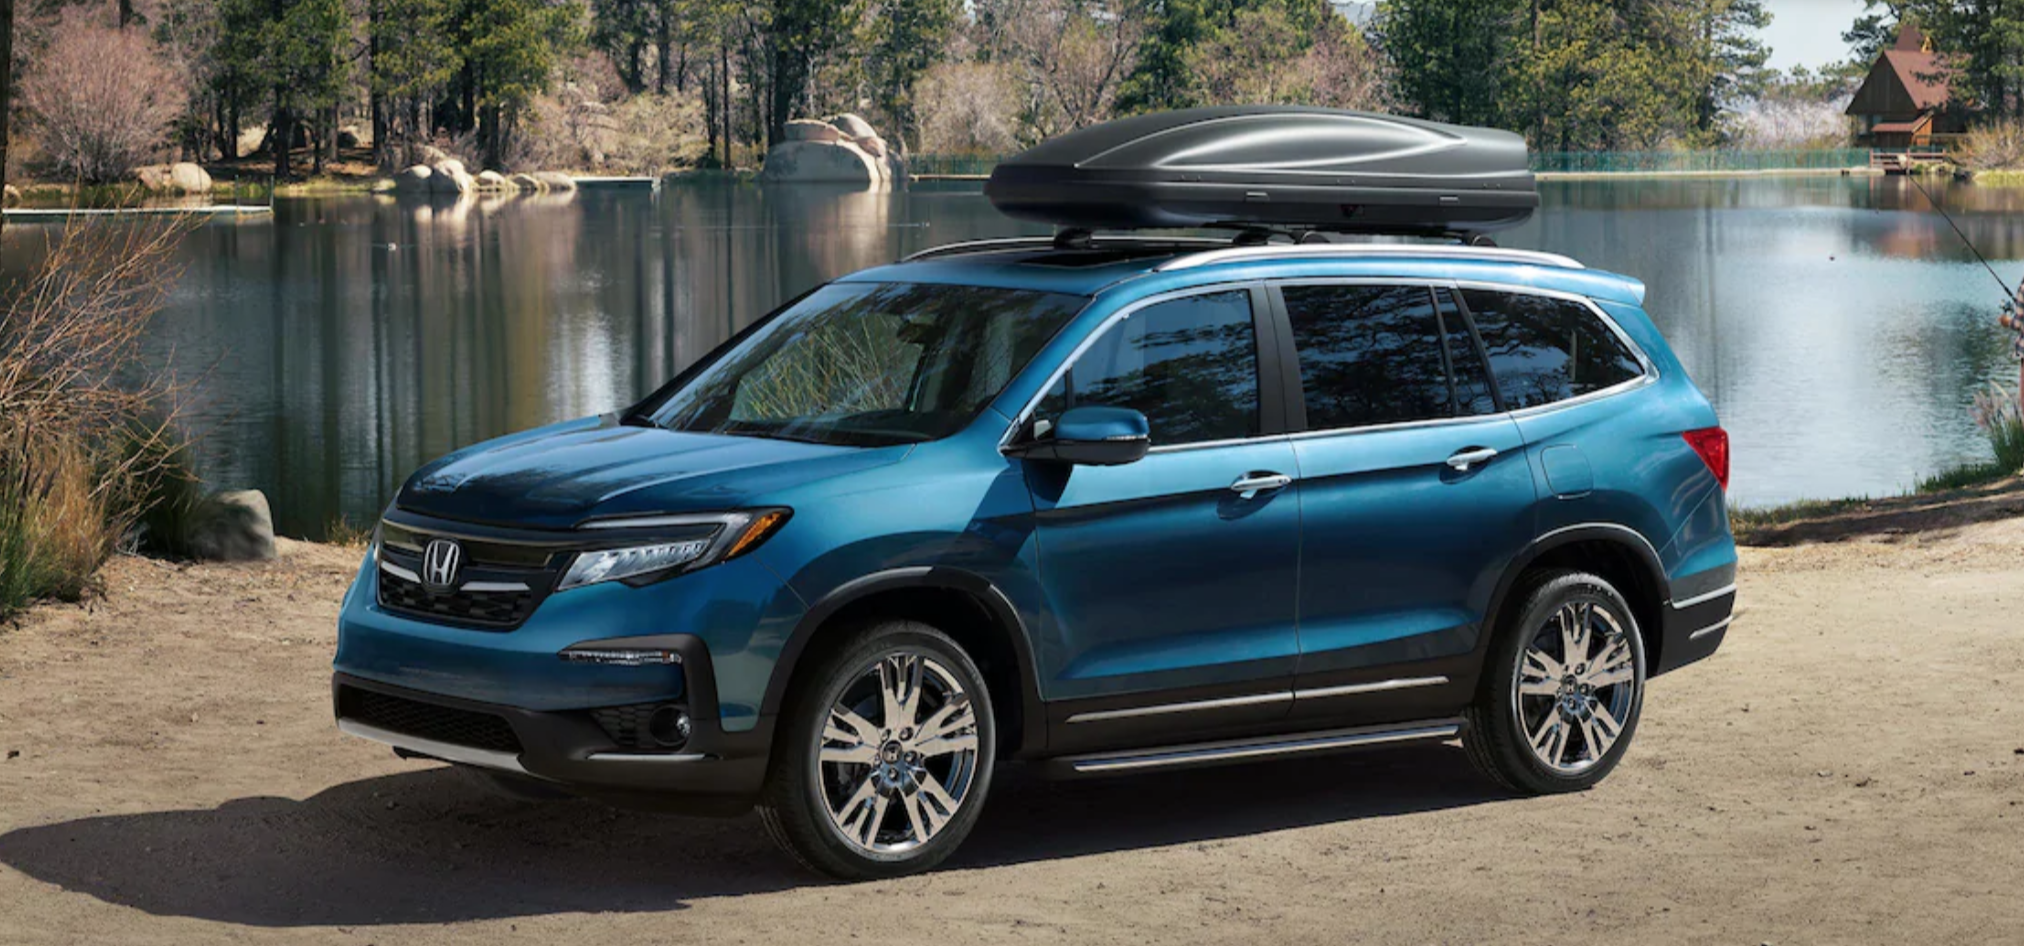 The 2019 Honda Pilot is All About Quality